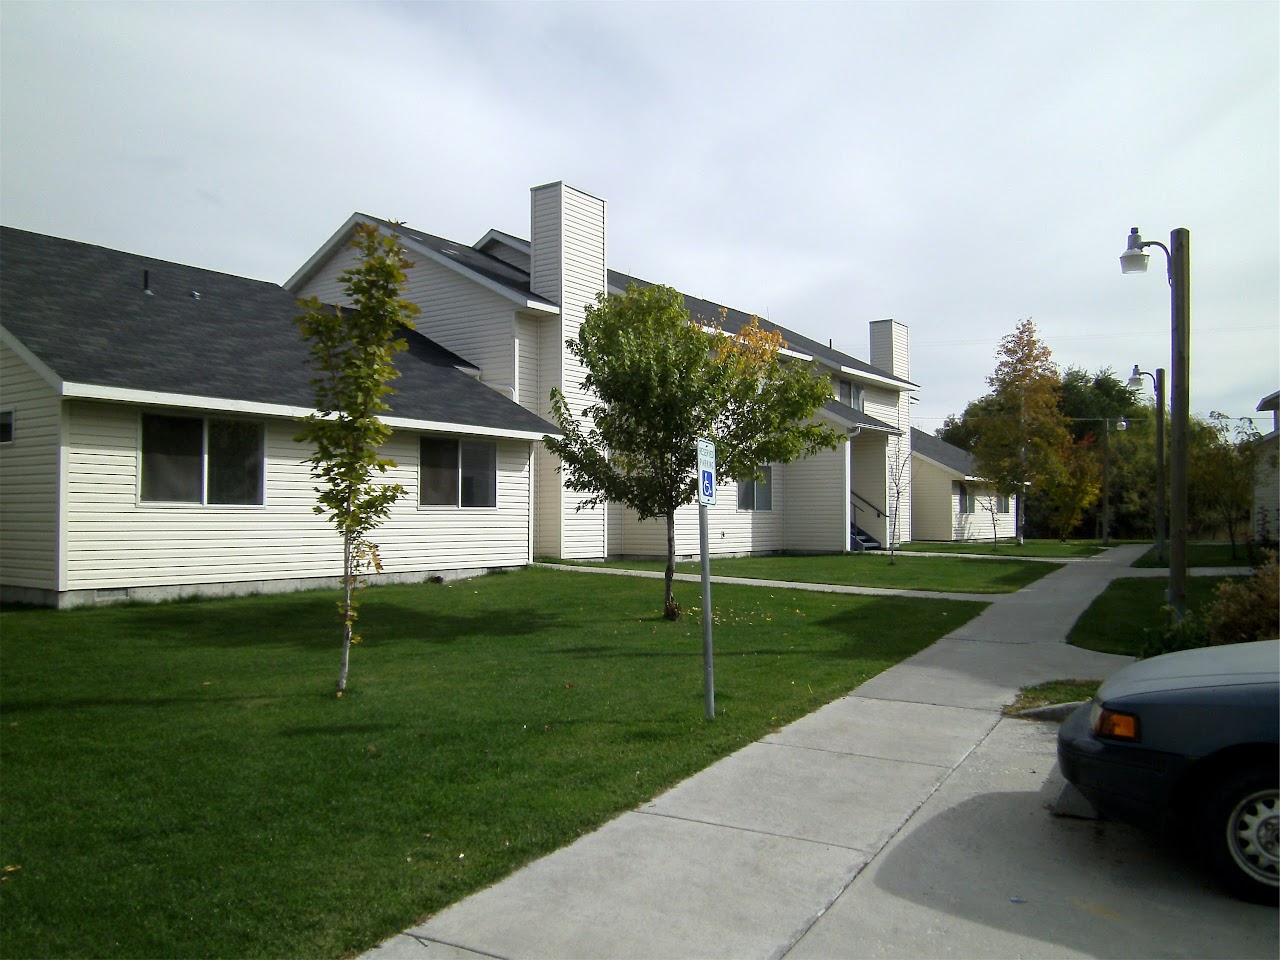 Photo of SUNGATE. Affordable housing located at 360 MARGARET STREET SALMON, ID 83467